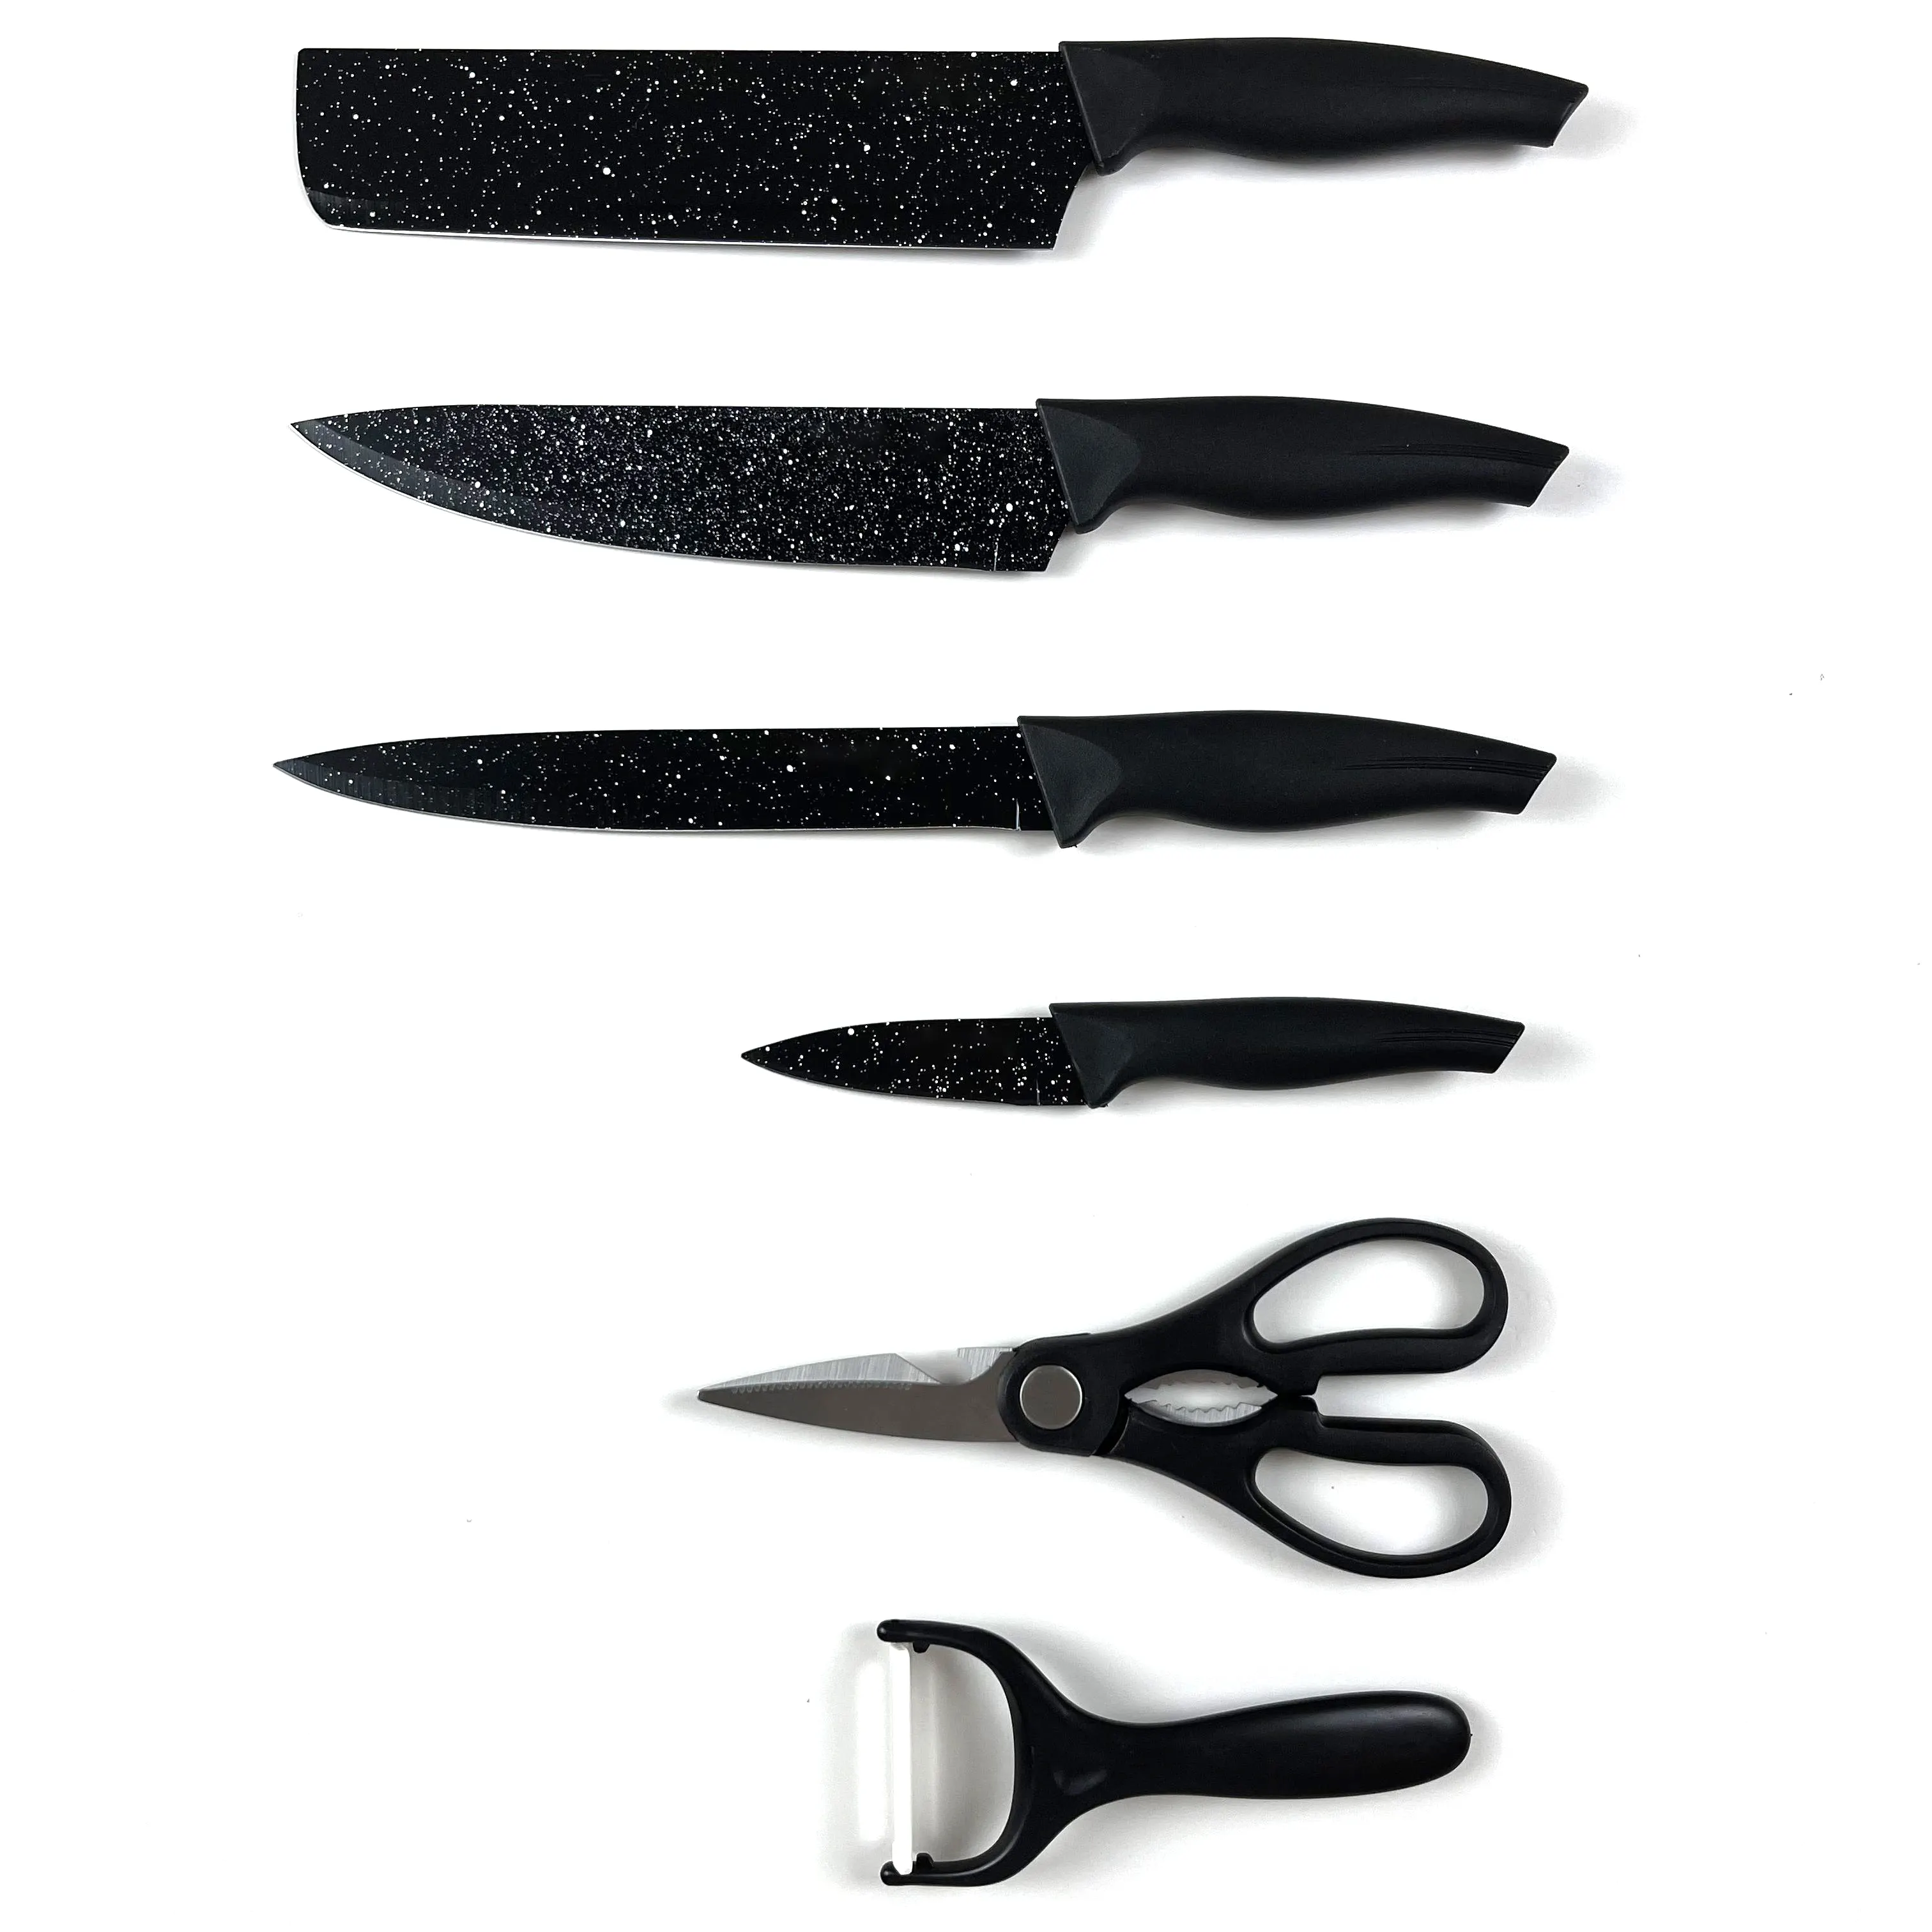 5 Pieces Black Coating Knife Sets Stainless Steel Kitchen Knives Sets